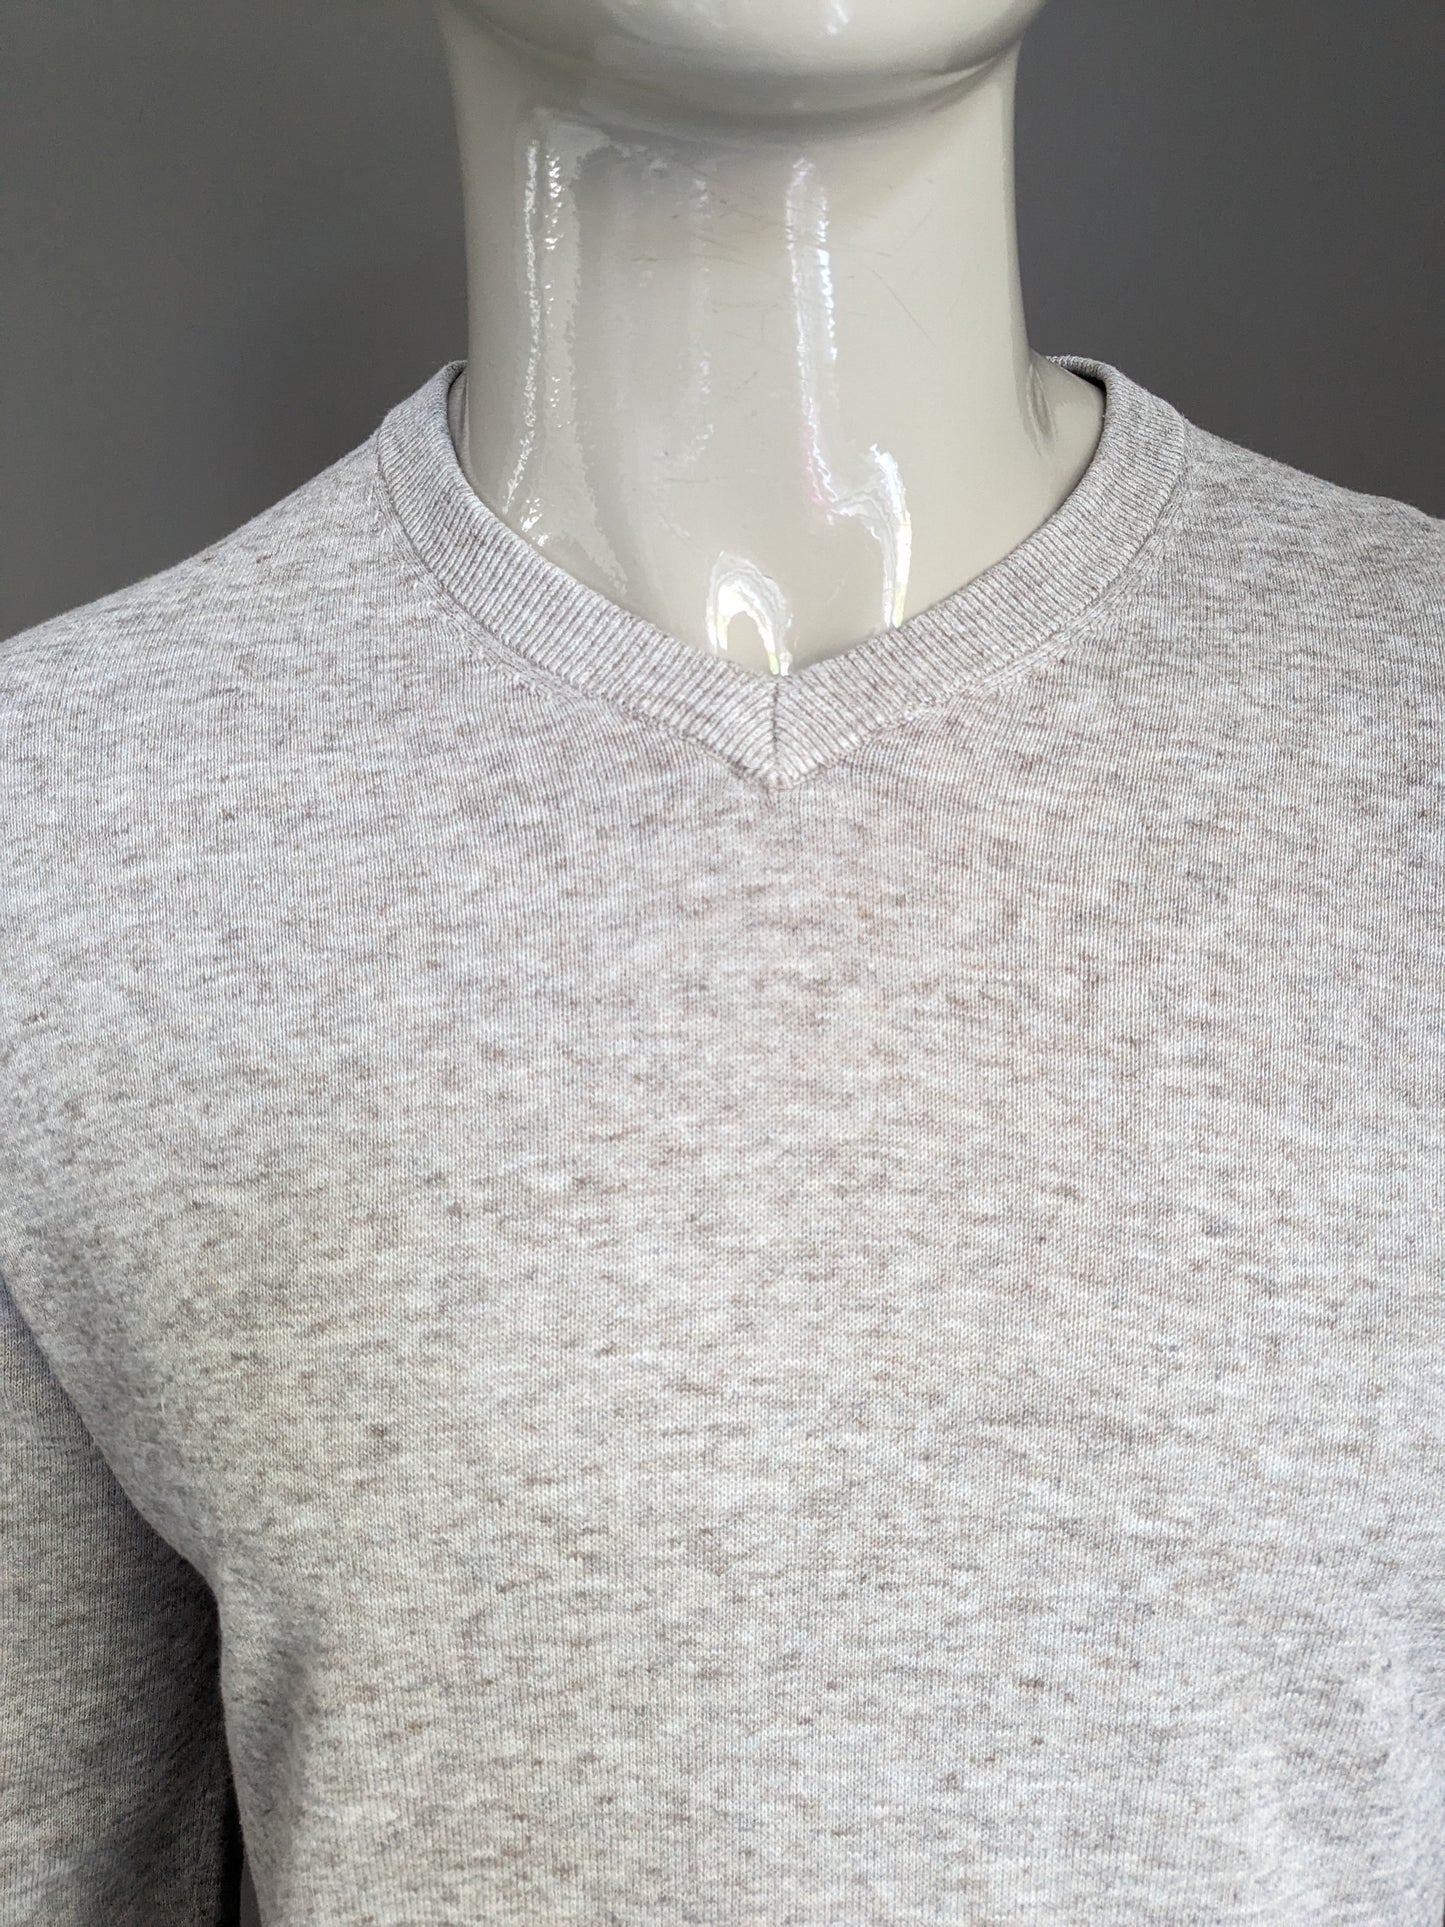 H&M sweater with V-neck. Beige brown mixed. Size M.